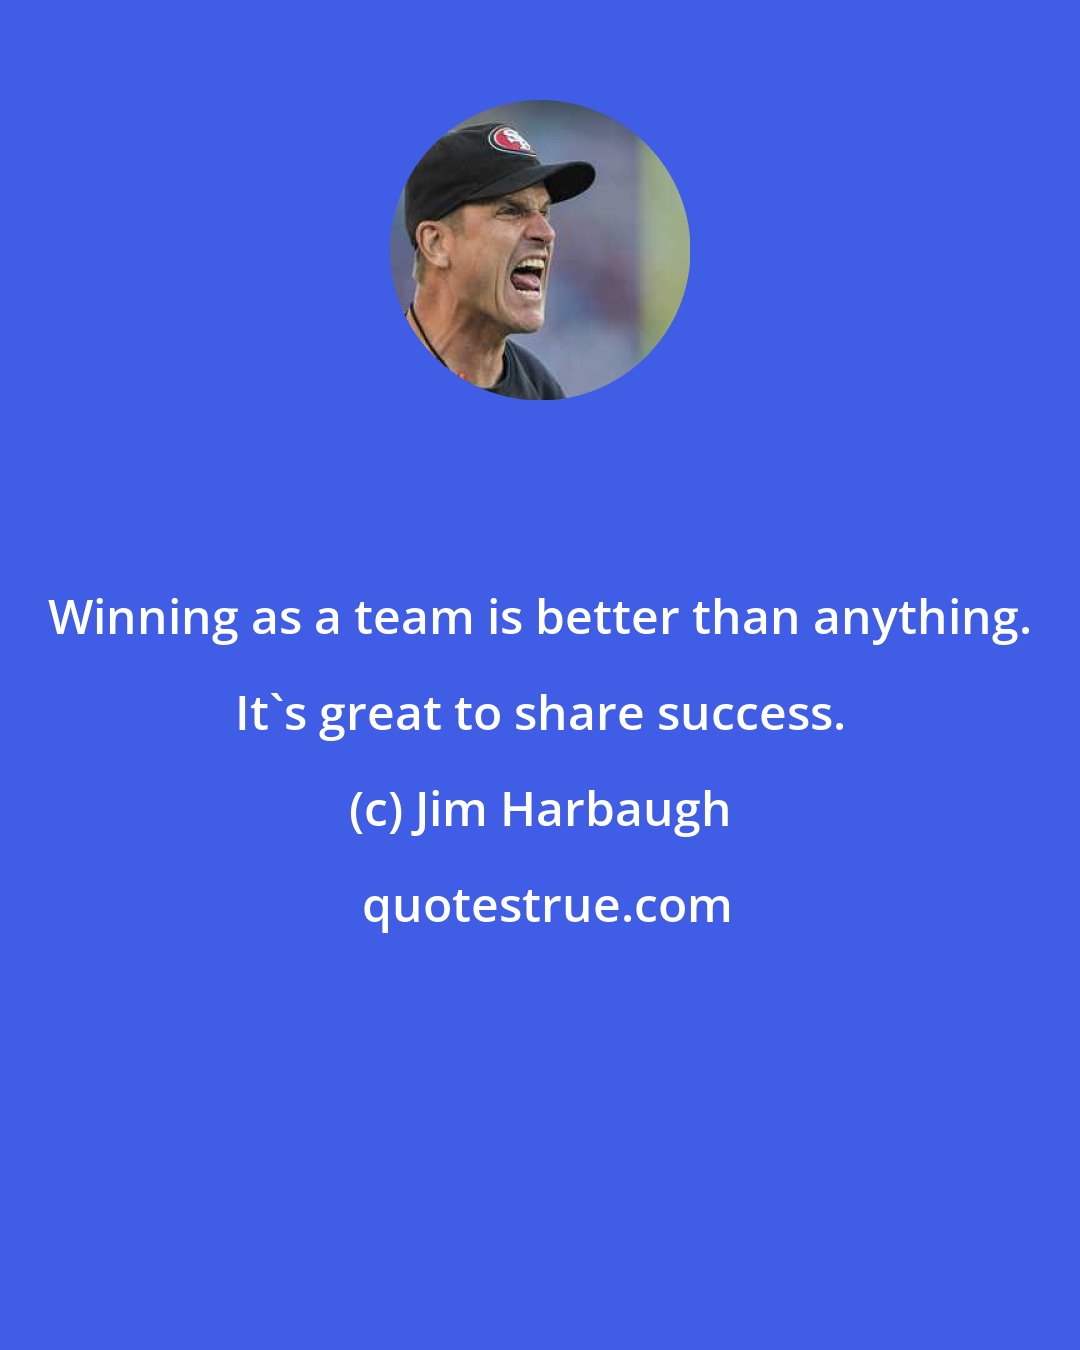 Jim Harbaugh: Winning as a team is better than anything. It's great to share success.